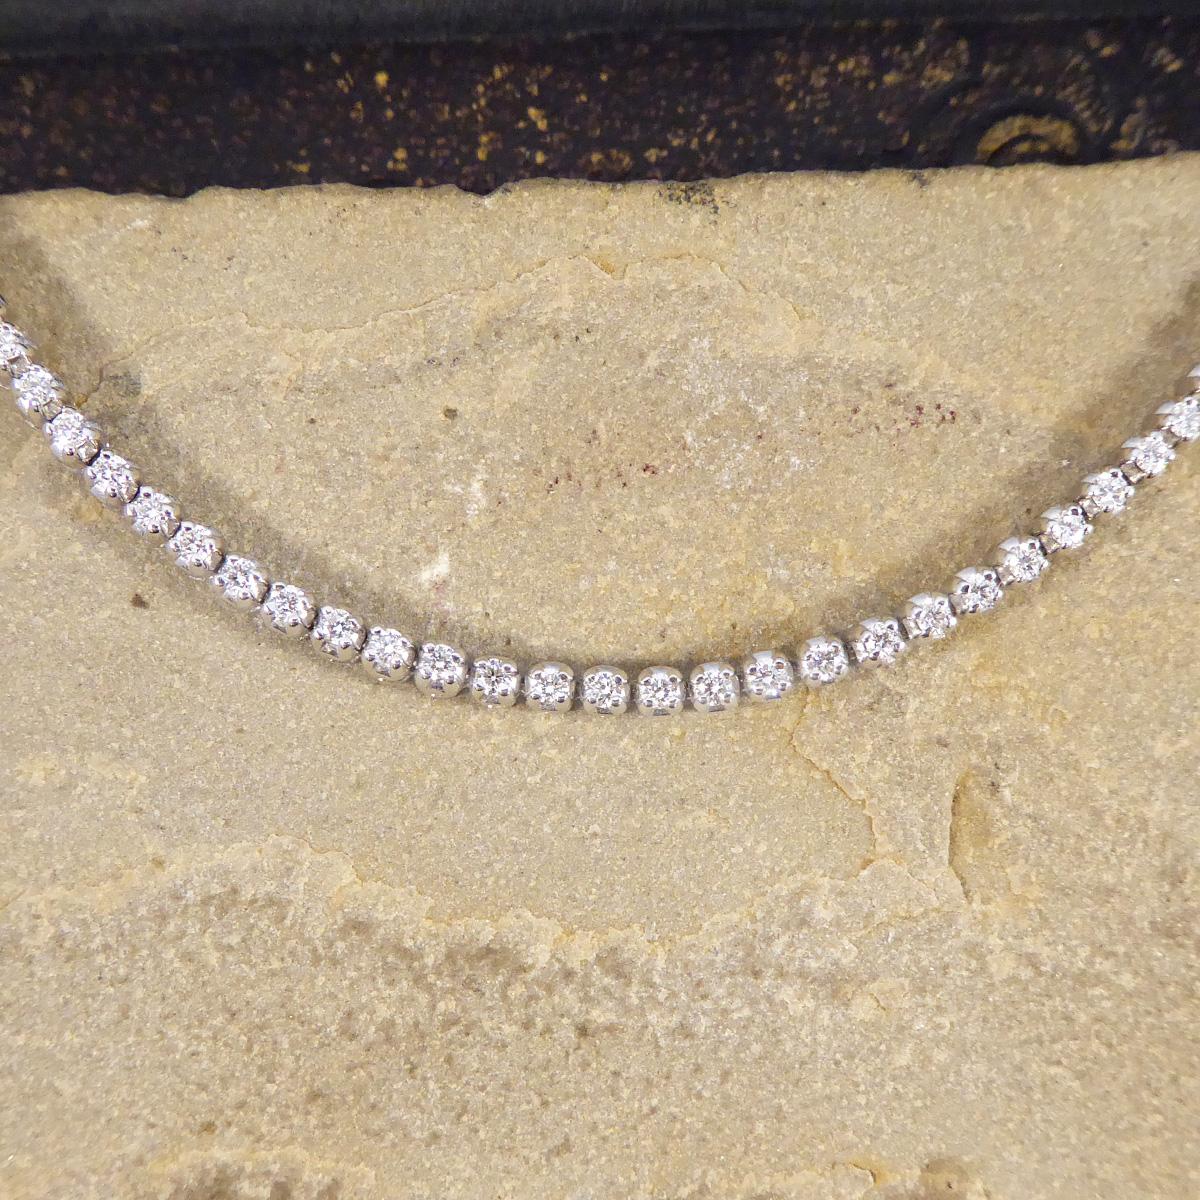 A classic, durable and easy to wear tennis bracelet. This tennis bracelet has been designed to be worn daily, it has a flexible link to take on any form and making the links wear less when worn. It holds 56 Round Brilliant Cut Diamonds that are set